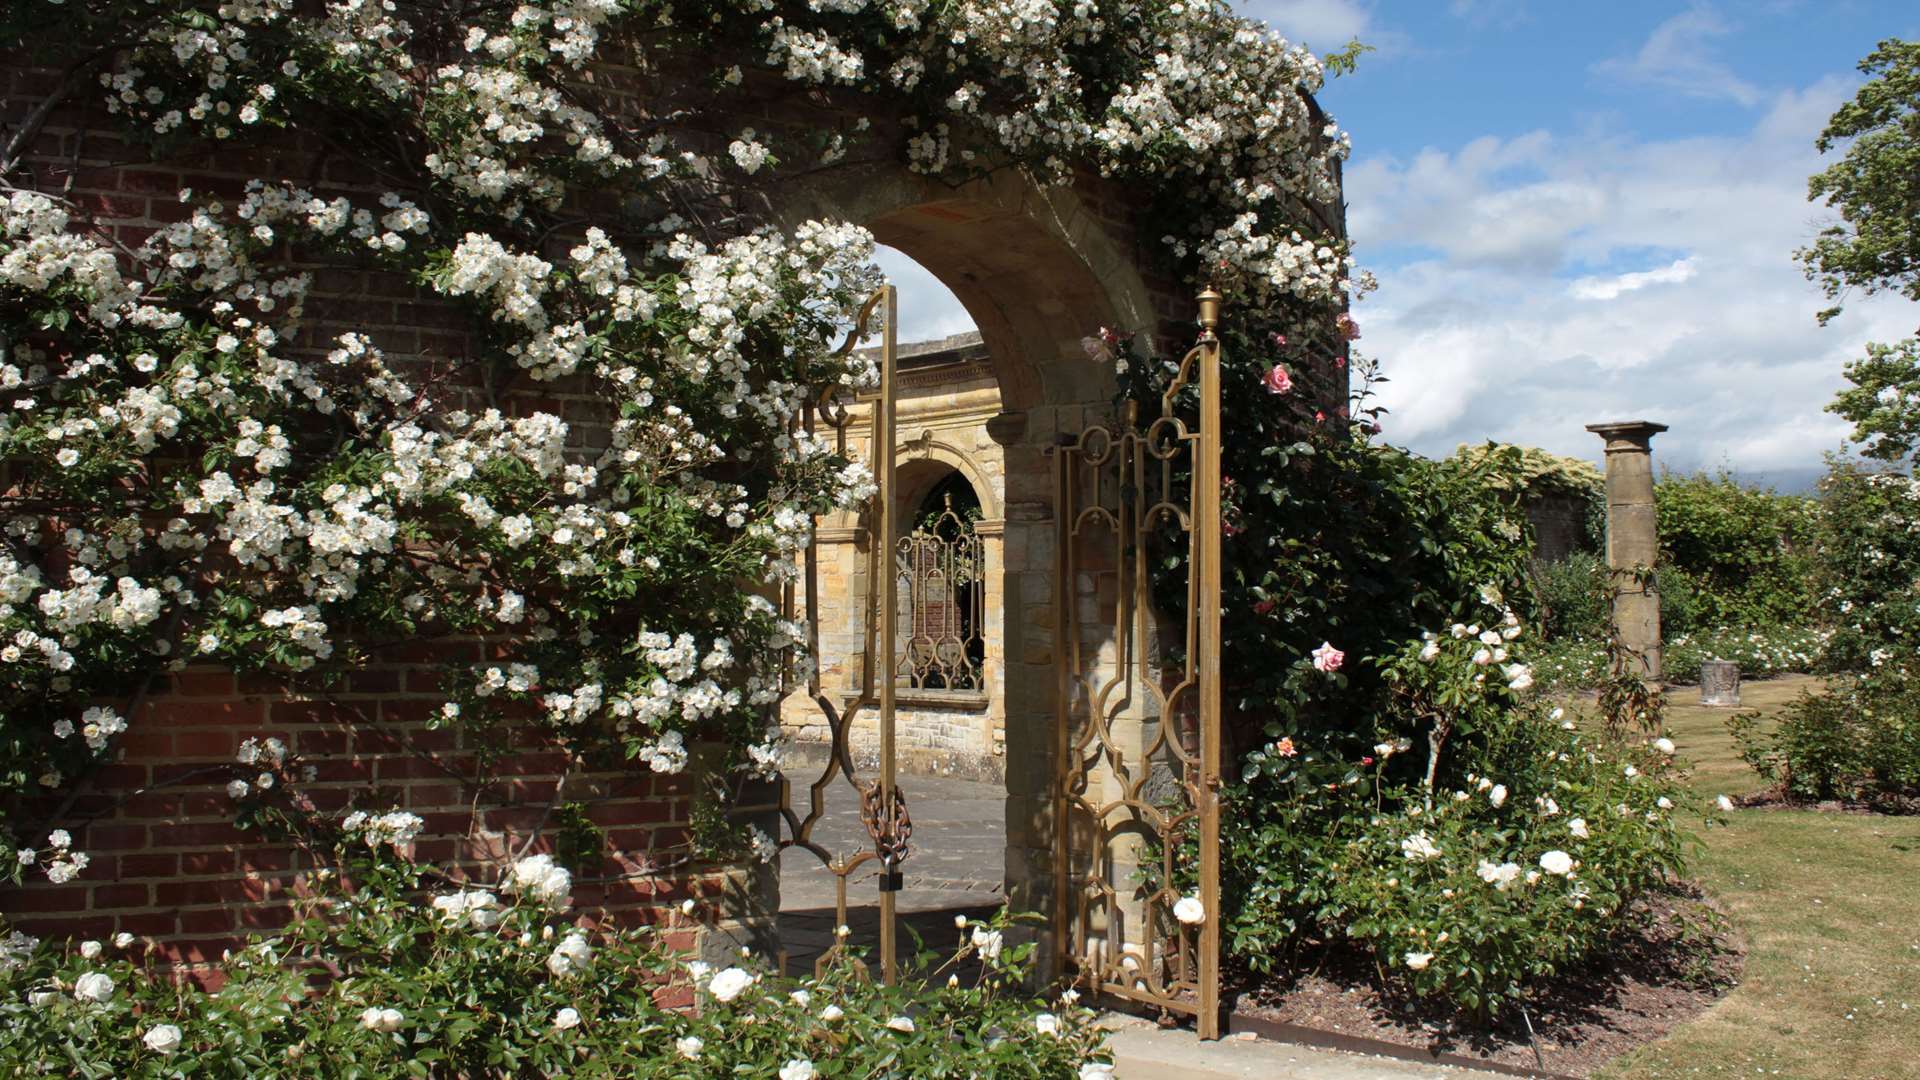 Hever in Bloom features quotes from literary greats and Harry Potter's glasses in flowers